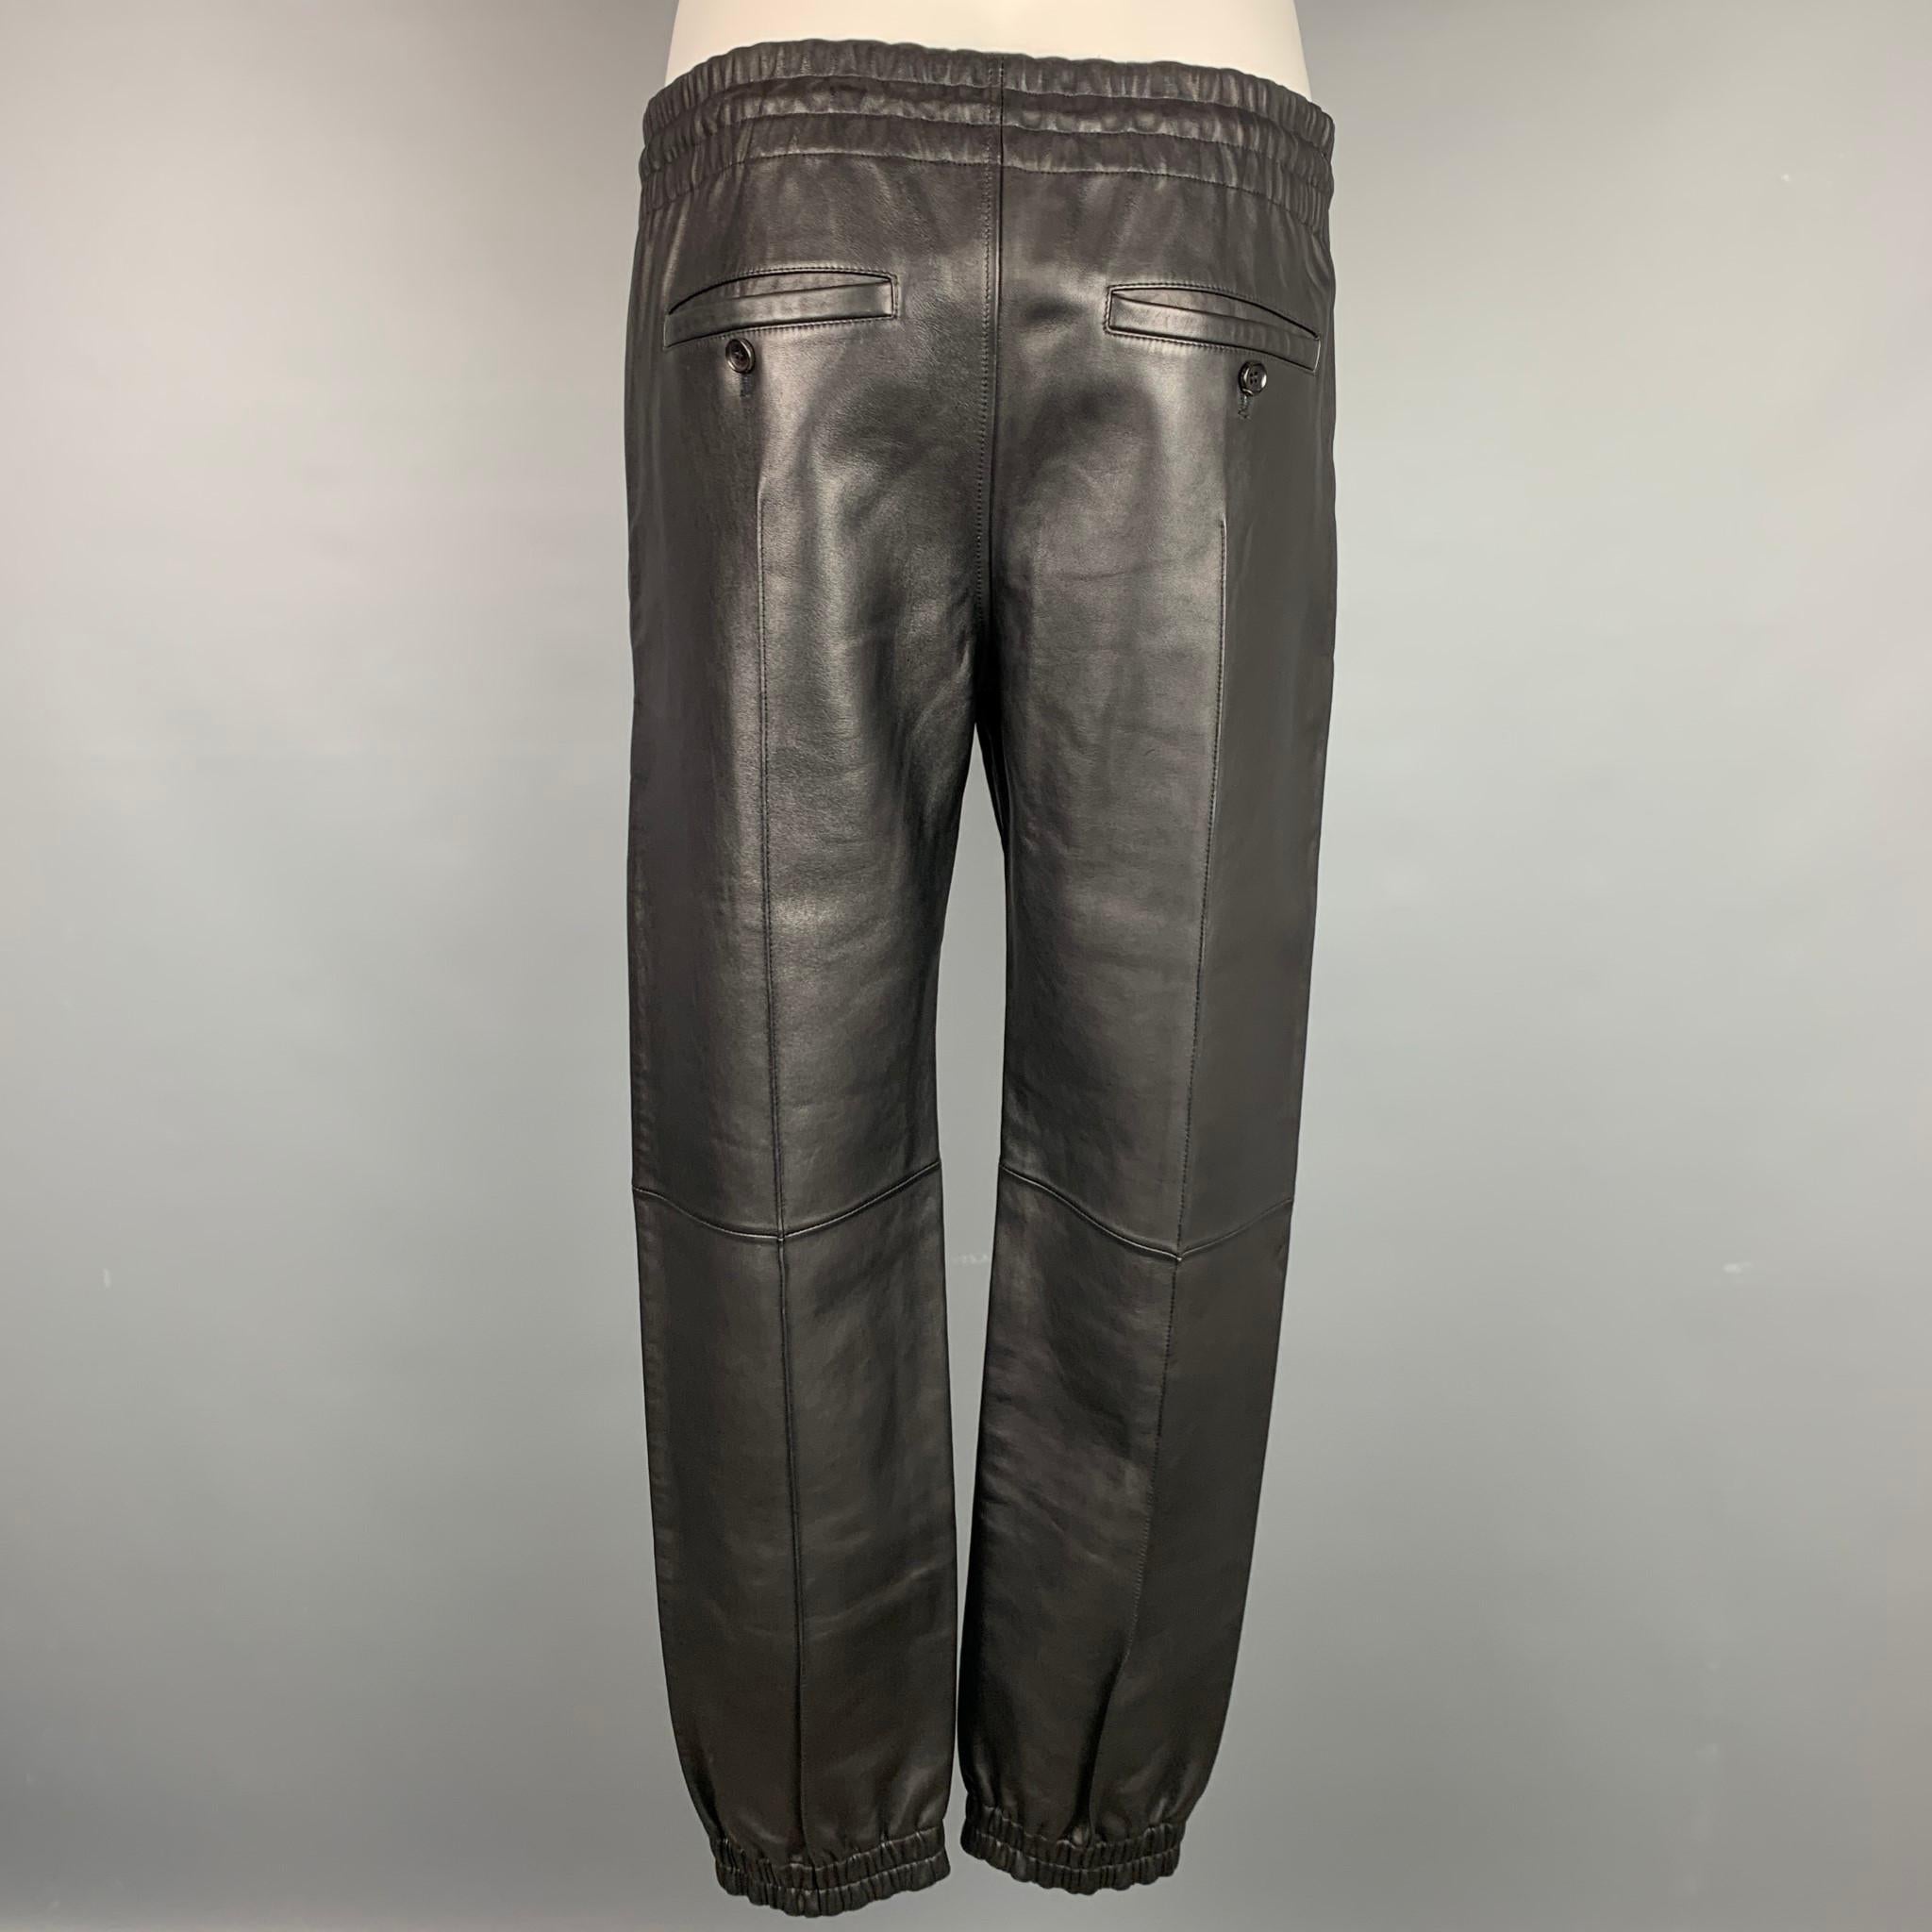 BALLY casual pants comes in a black leather featuring a elastic waistband, top stitching, and a drawstring closure. Made in Italy.

New With Tags. 
Marked: 46
Original Retail Price: $2,395.00

Measurements:

Waist: 28 in.
Rise: 11.5 in.
Inseam: 27